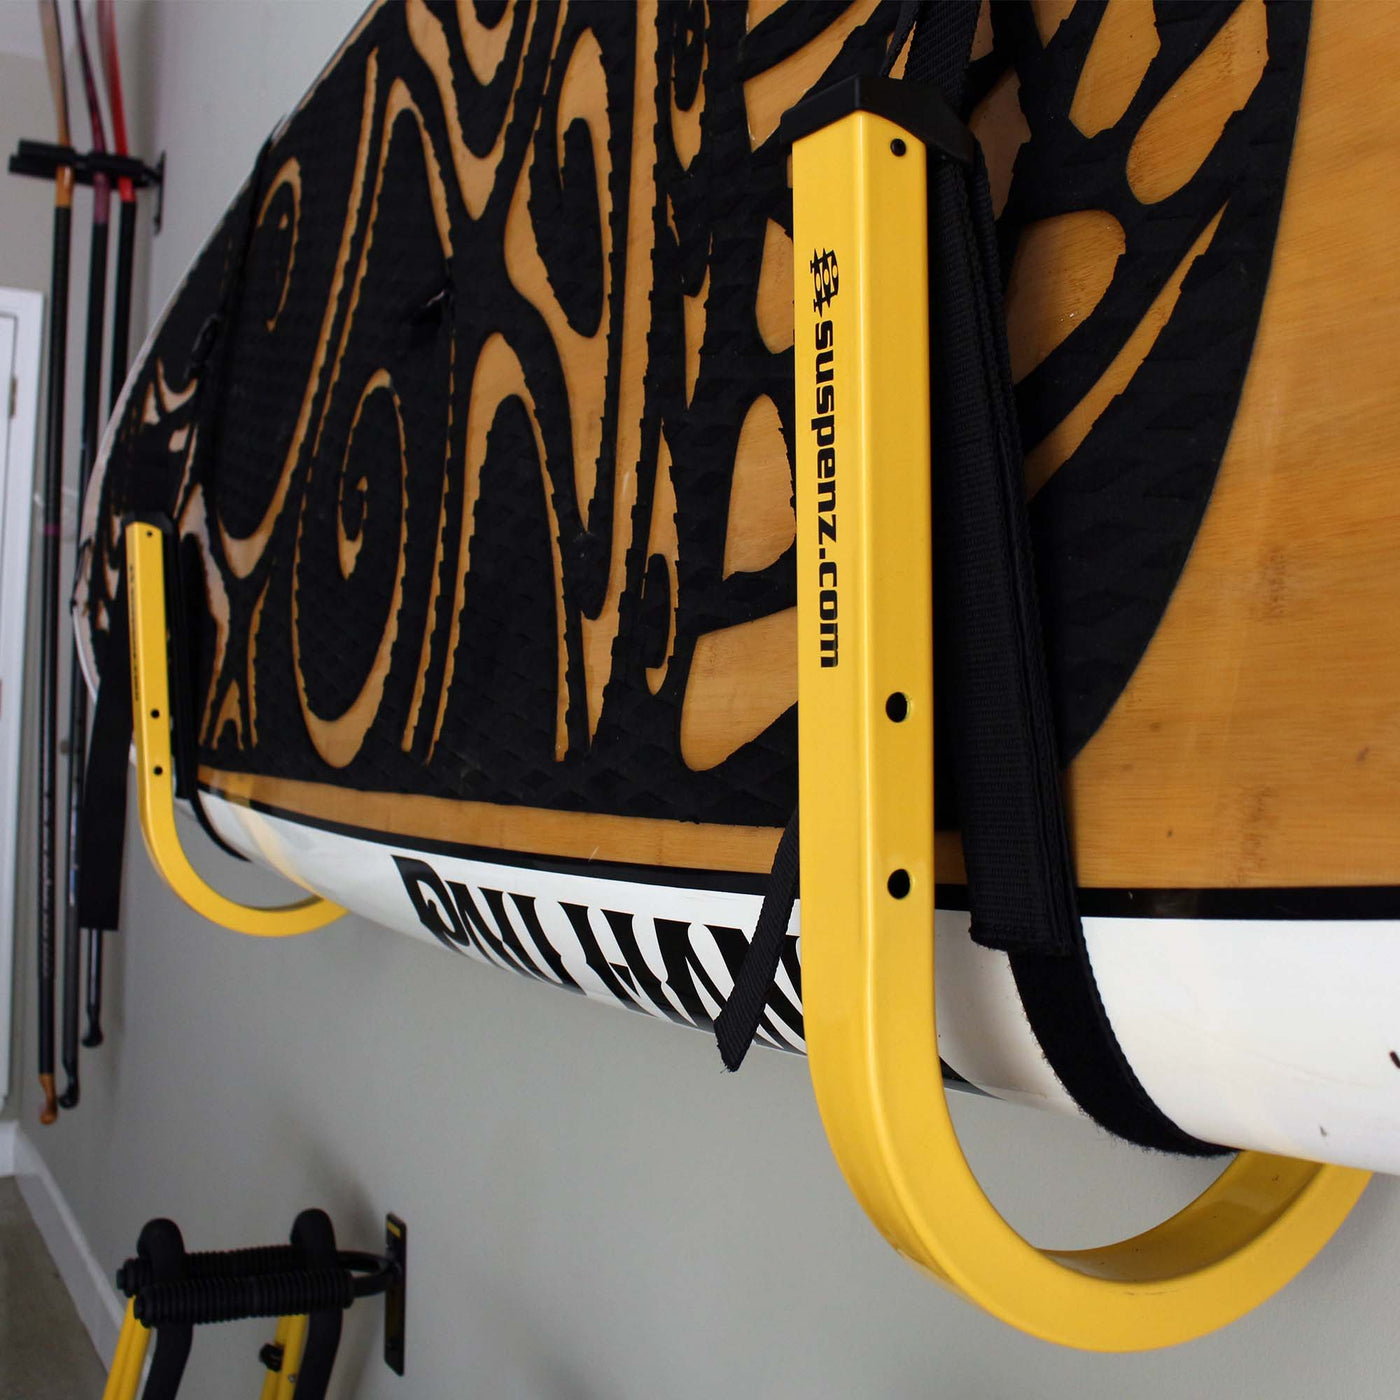 1 set of stand-up paddleboard wall storage mounted to a garage wall with a SUP loaded on it.